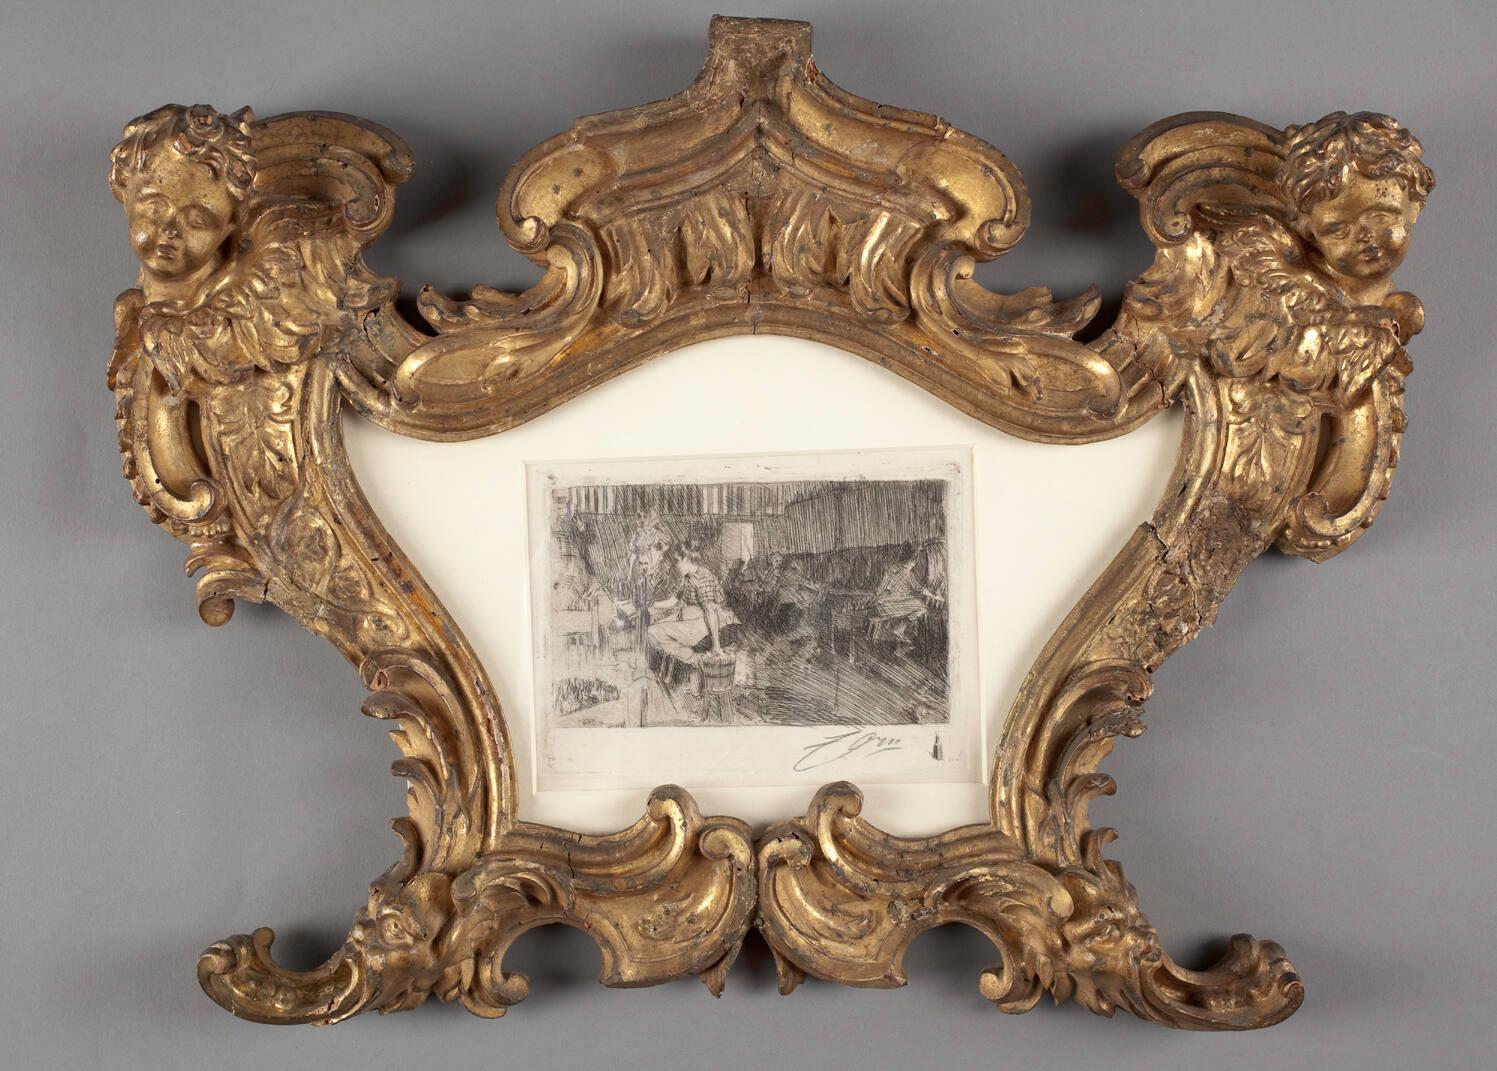 An ornate etching in a gold frame.